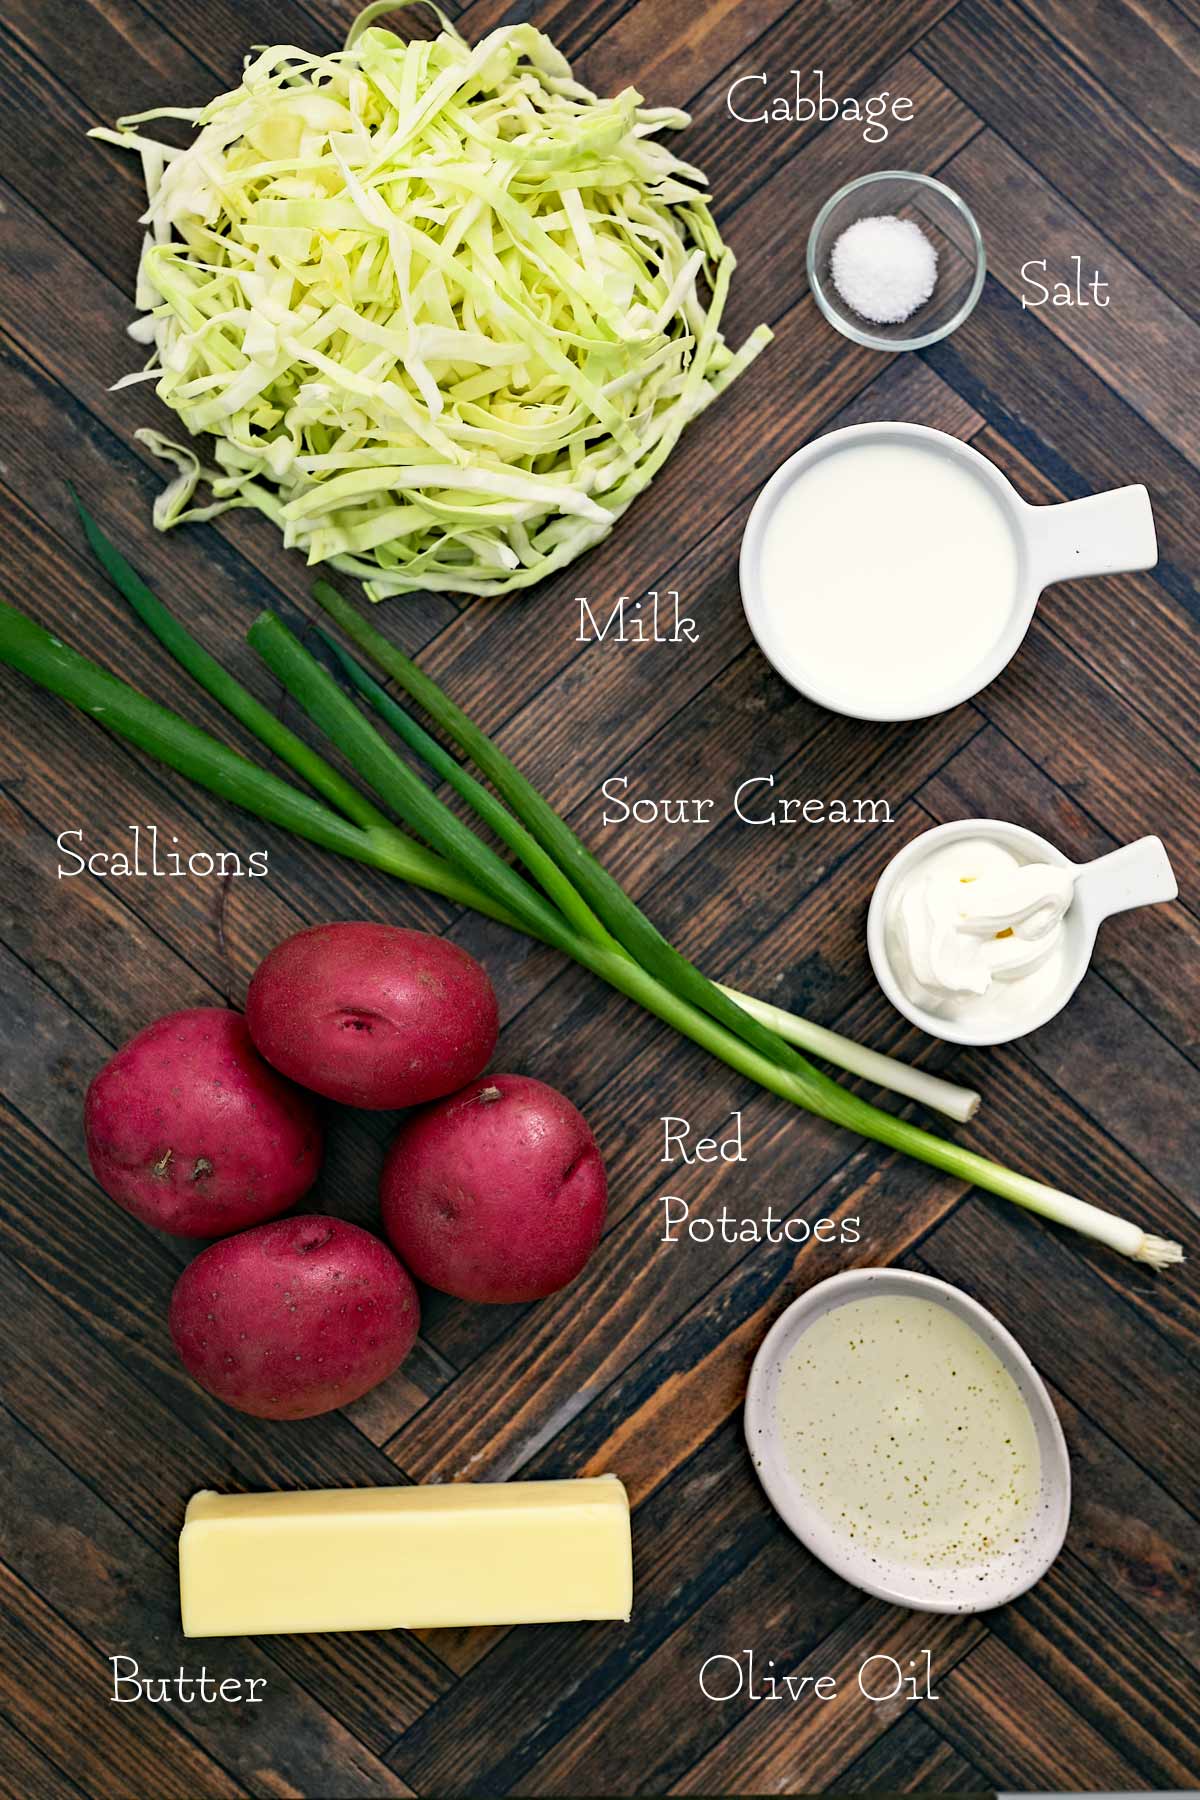 Irish colcannon ingredients for cabbage slaw on a wooden table.